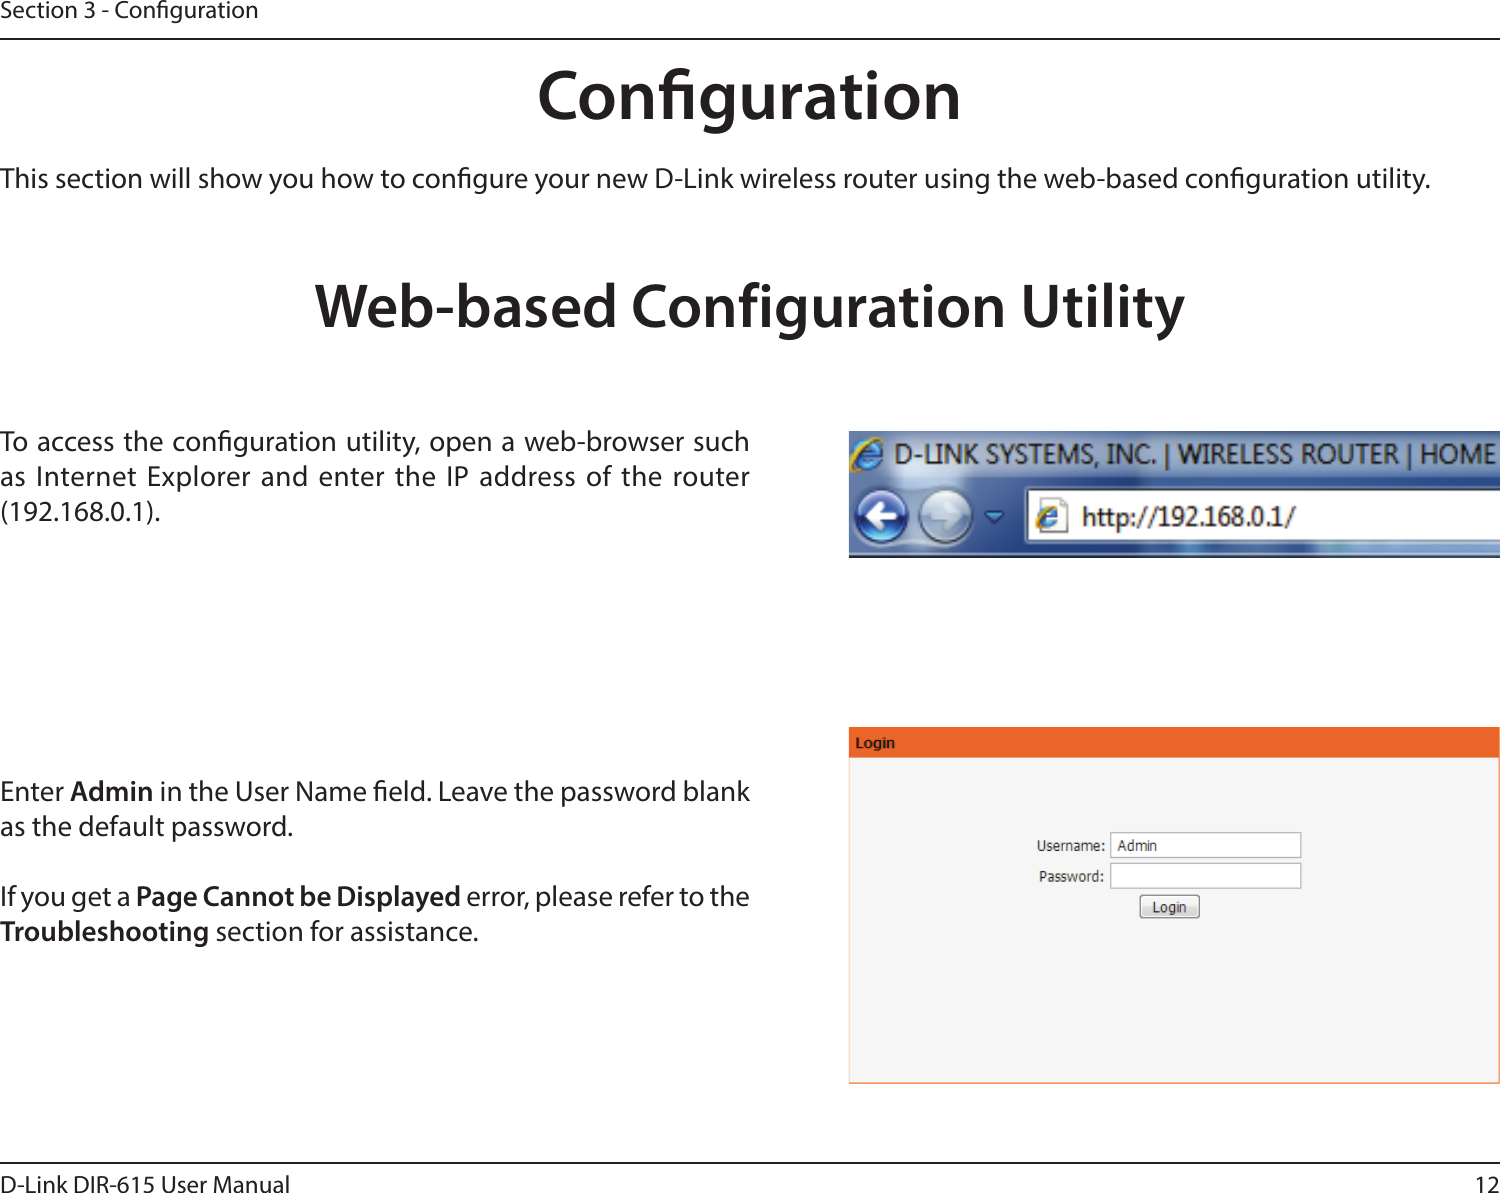 12D-Link DIR-615 User ManualSection 3 - CongurationCongurationThis section will show you how to congure your new D-Link wireless router using the web-based conguration utility.Web-based Configuration UtilityTo access the conguration utility, open a web-browser such as Internet Explorer and enter the IP address of the router (192.168.0.1).Enter Admin in the User Name eld. Leave the password blank as the default password. If you get a Page Cannot be Displayed error, please refer to the Troubleshooting section for assistance.